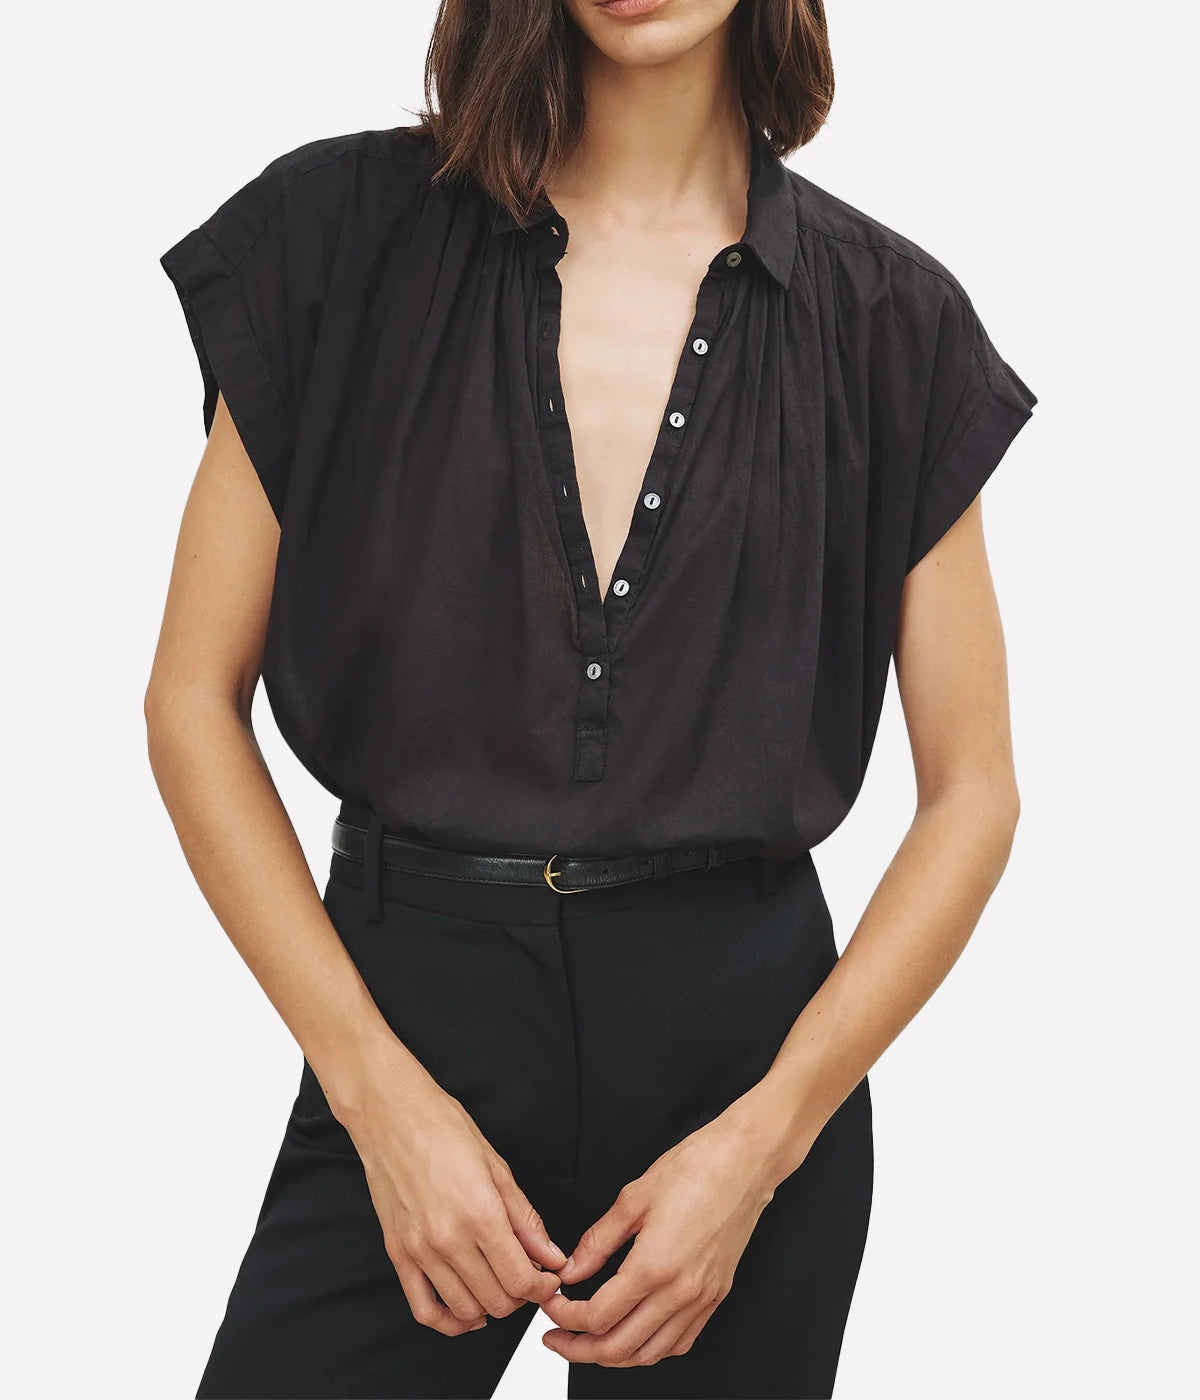 Normandy Blouse in Black